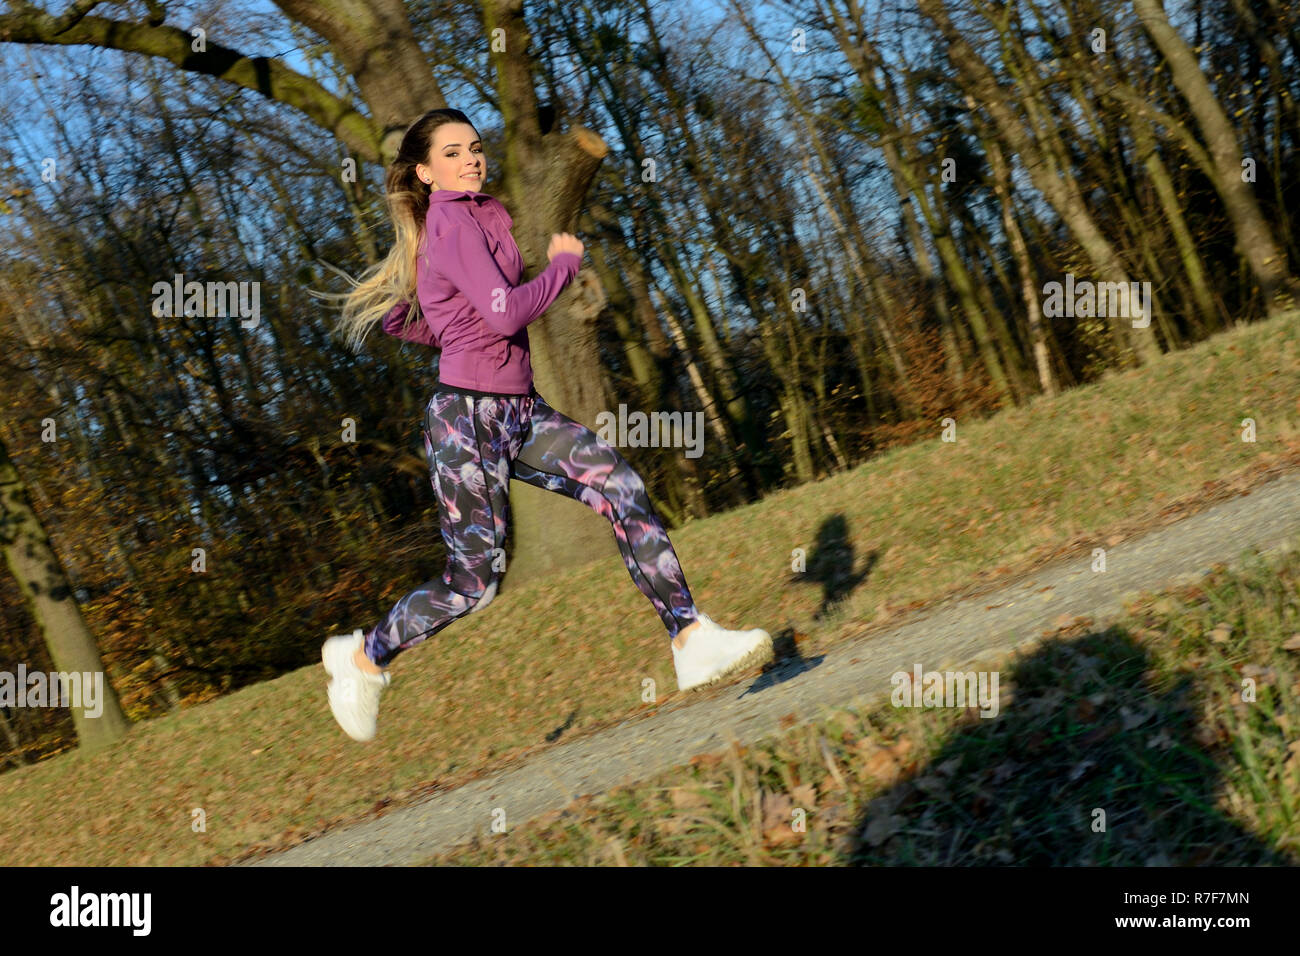 Young girl running in the forest. Blonde female with colorful leggings and purple top. Active runner with released hairs. Stock Photo